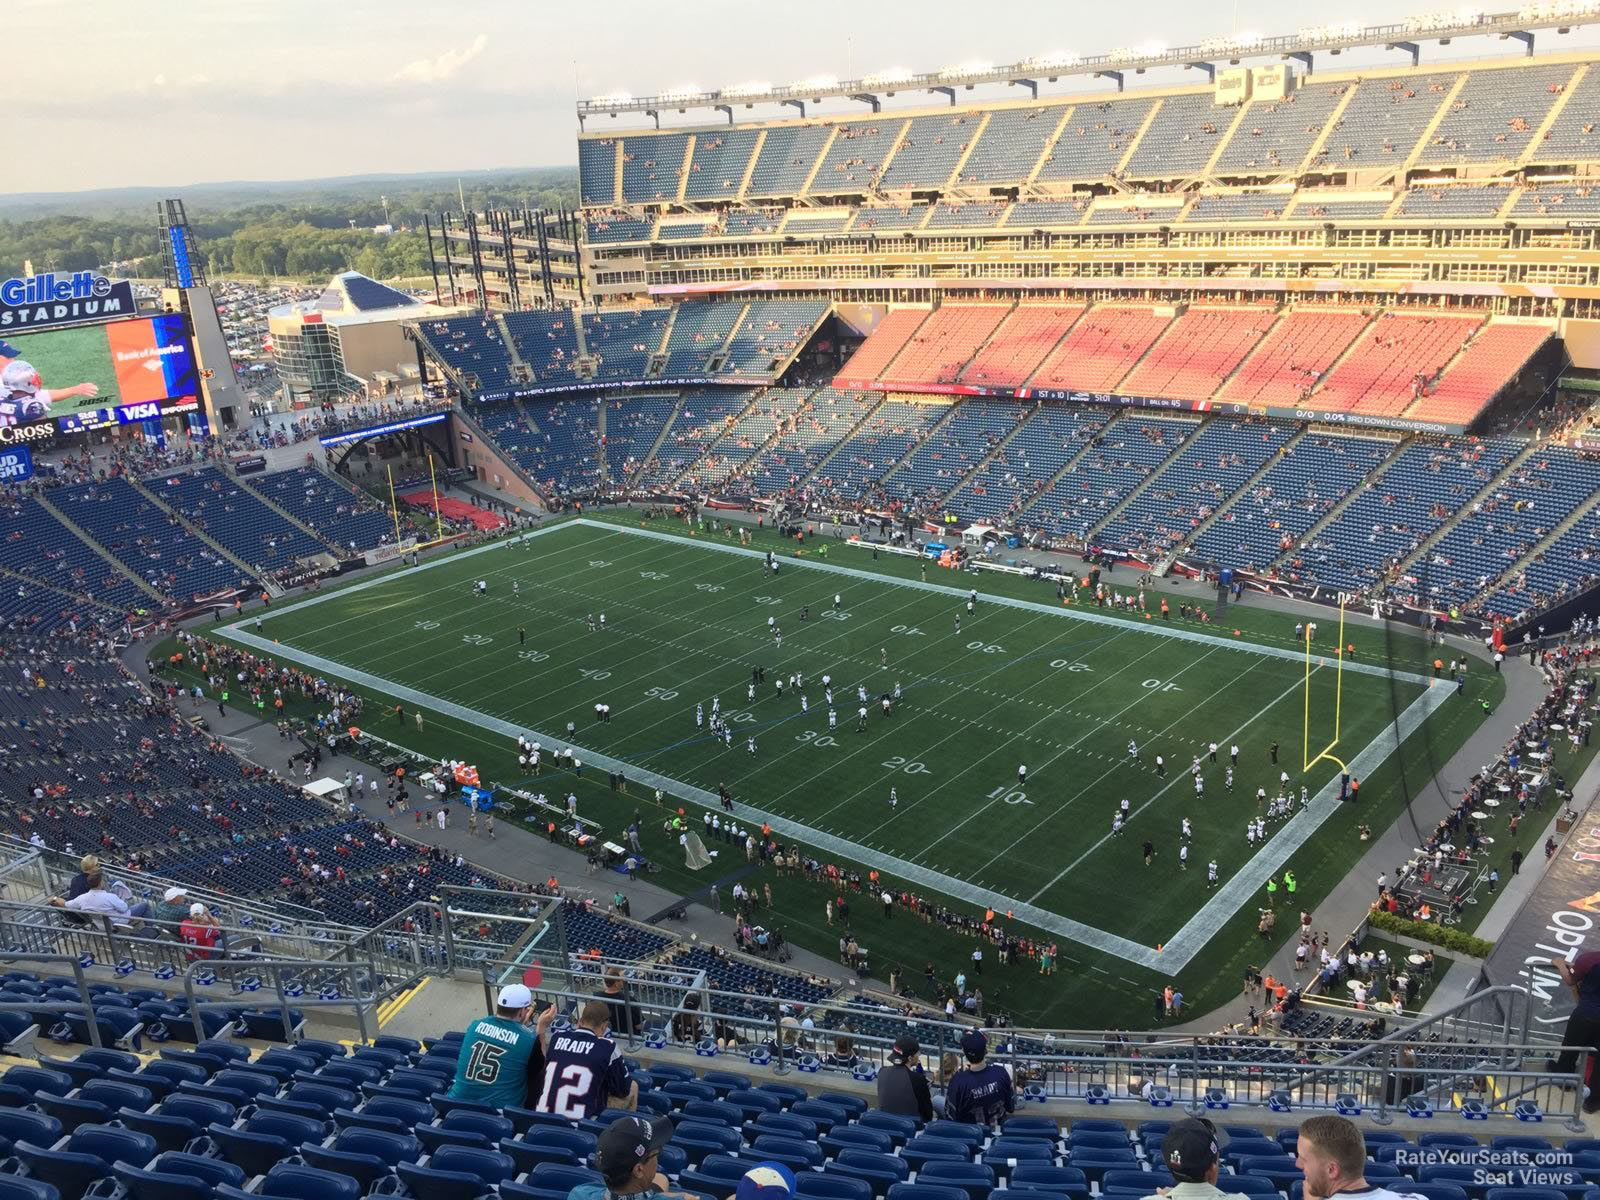 section 325, row 19 seat view  for football - gillette stadium